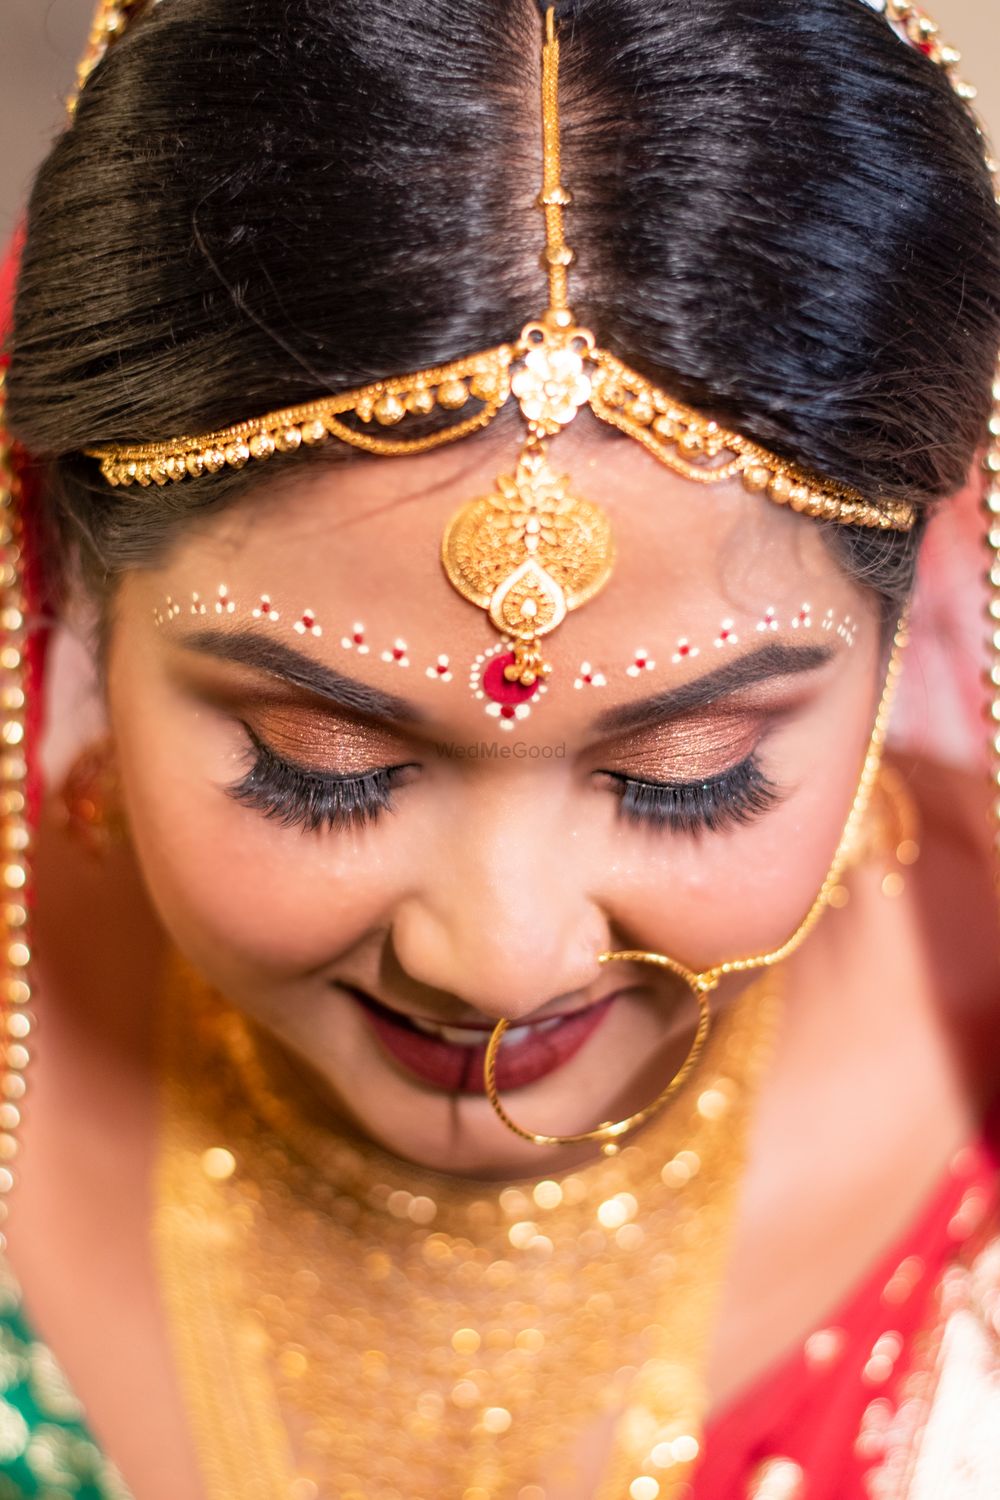 Photo From Tanned skin Bridal look - By Namrata's Studio